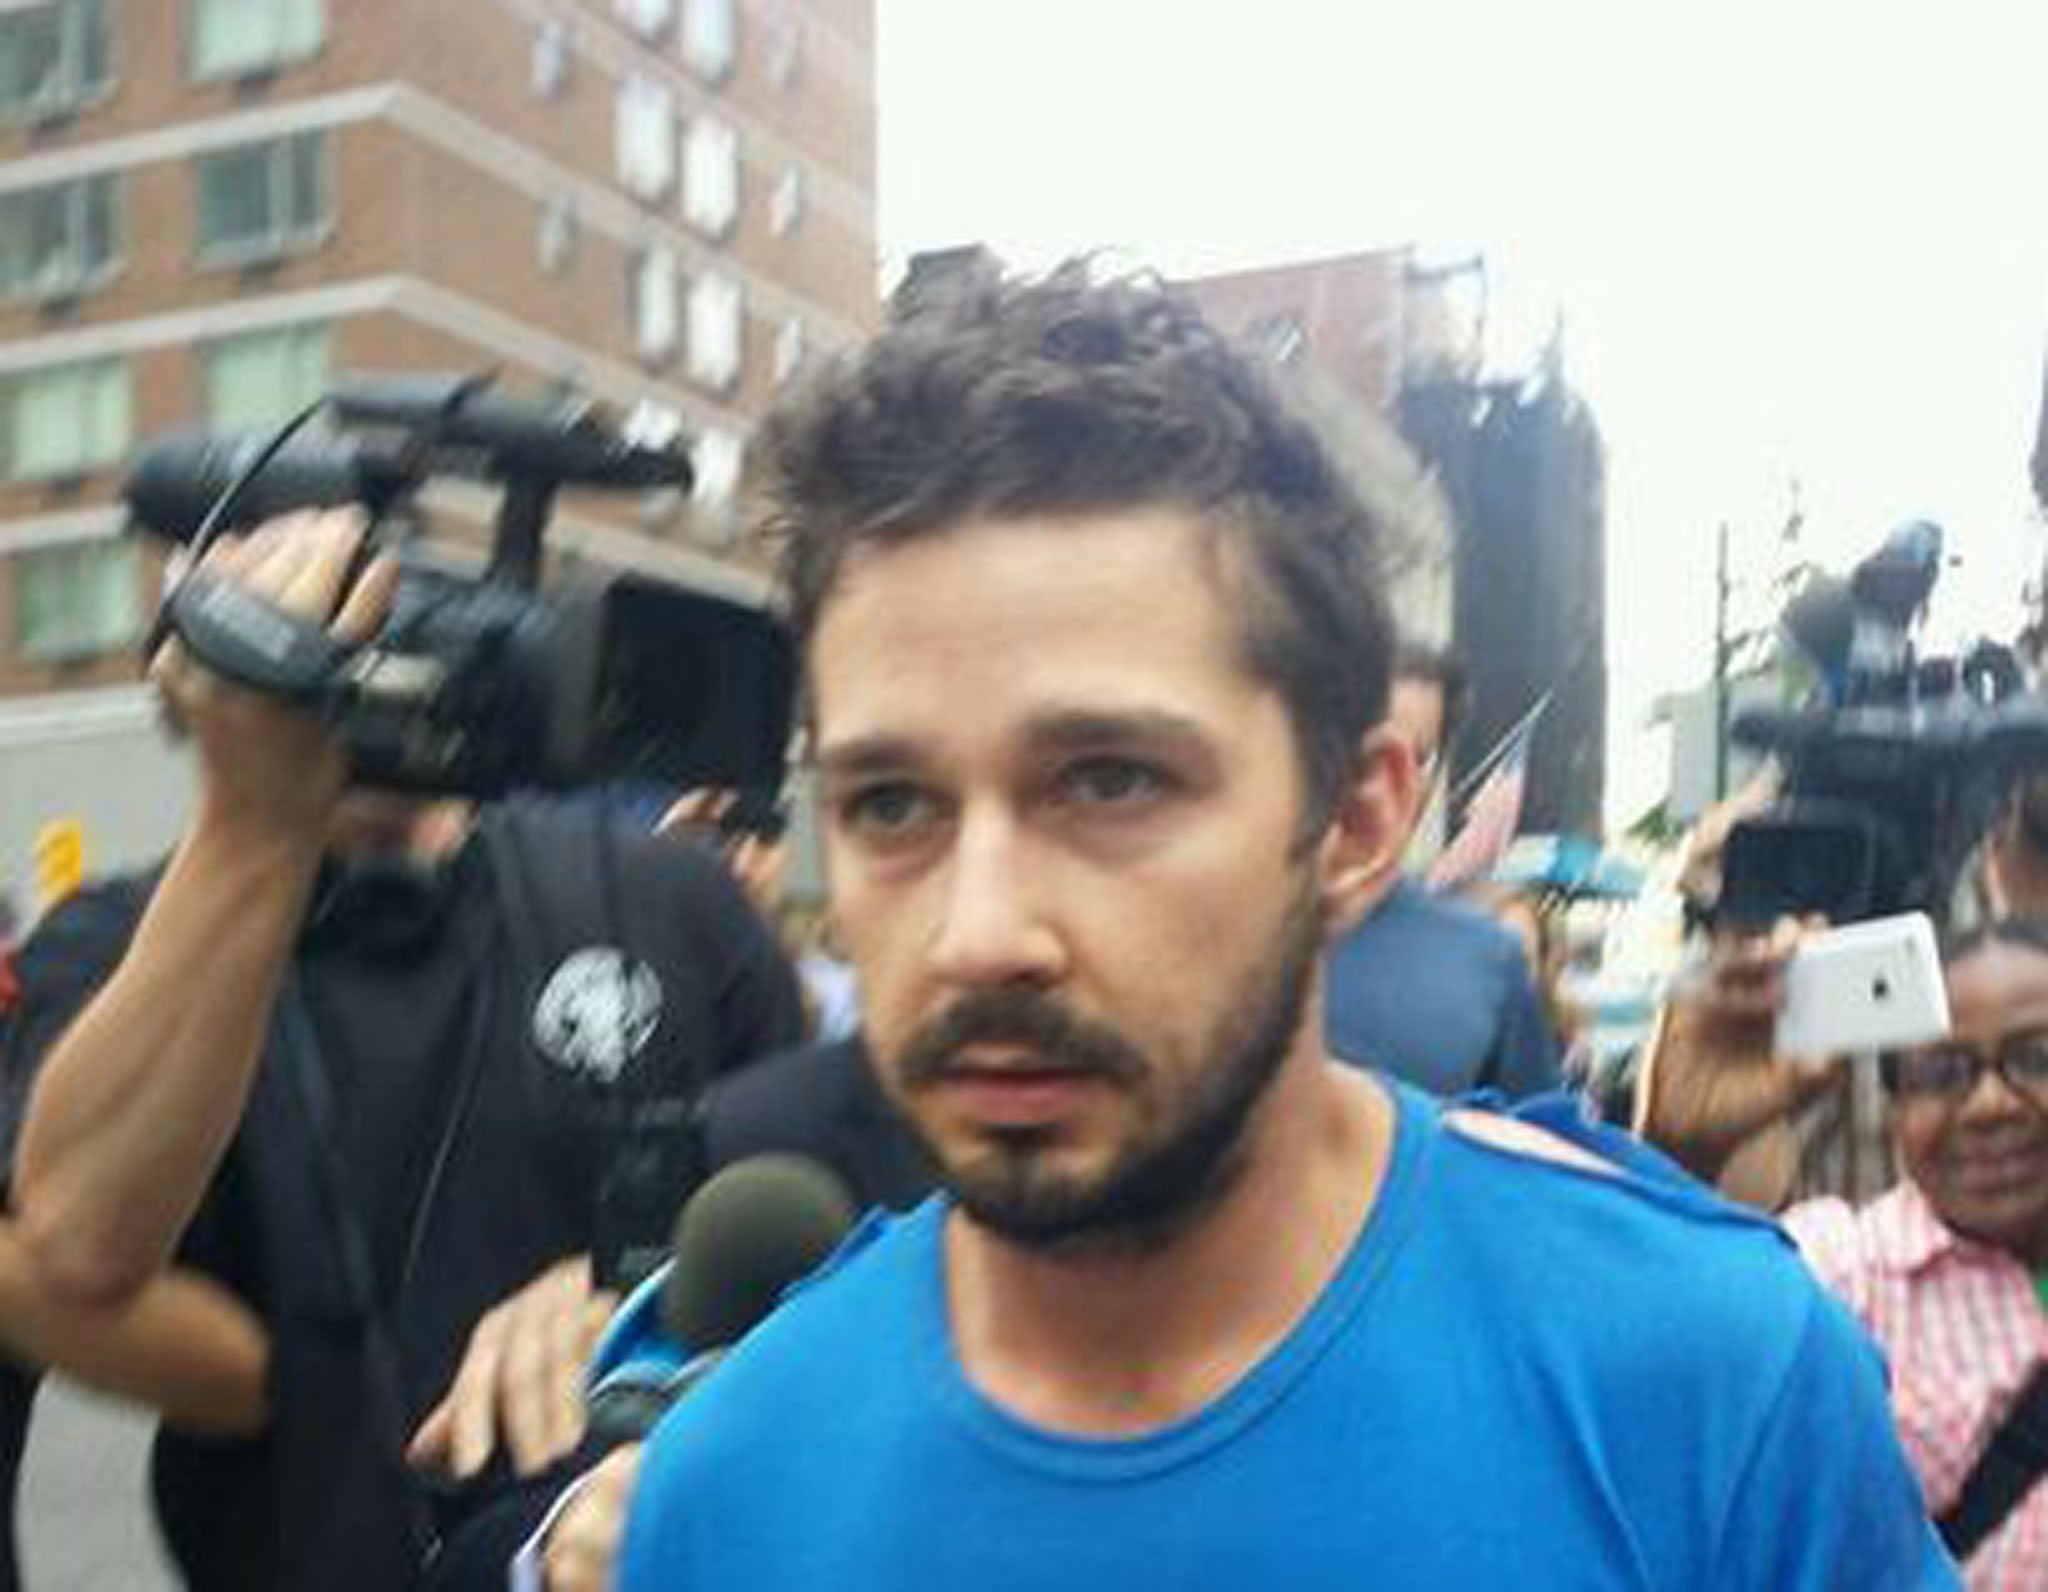 LaBeouf was surrounded by the press as he left a New York police station on Friday